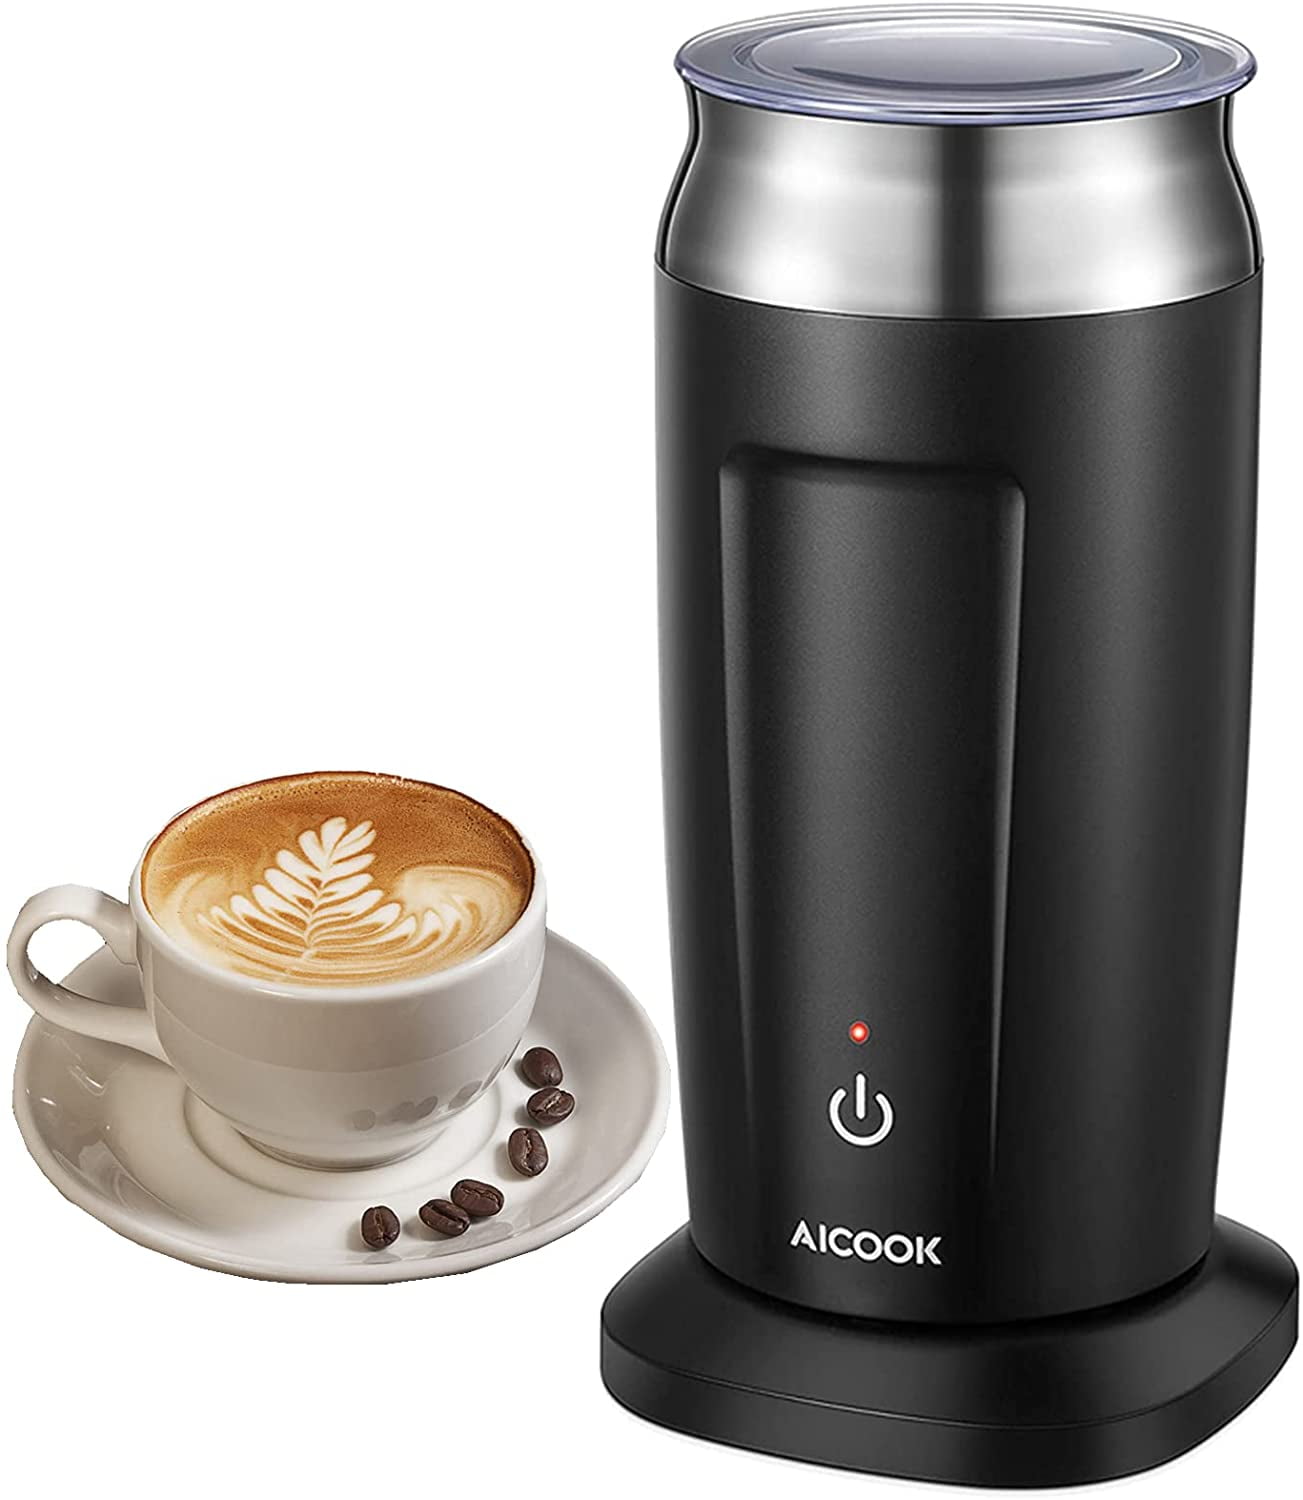 AICOOK Milk Frother Electric, Hot & Cold Milk Frother and Steamer with  Strix Control, Coffee Frother With Auto Magnetic Drive Rotor